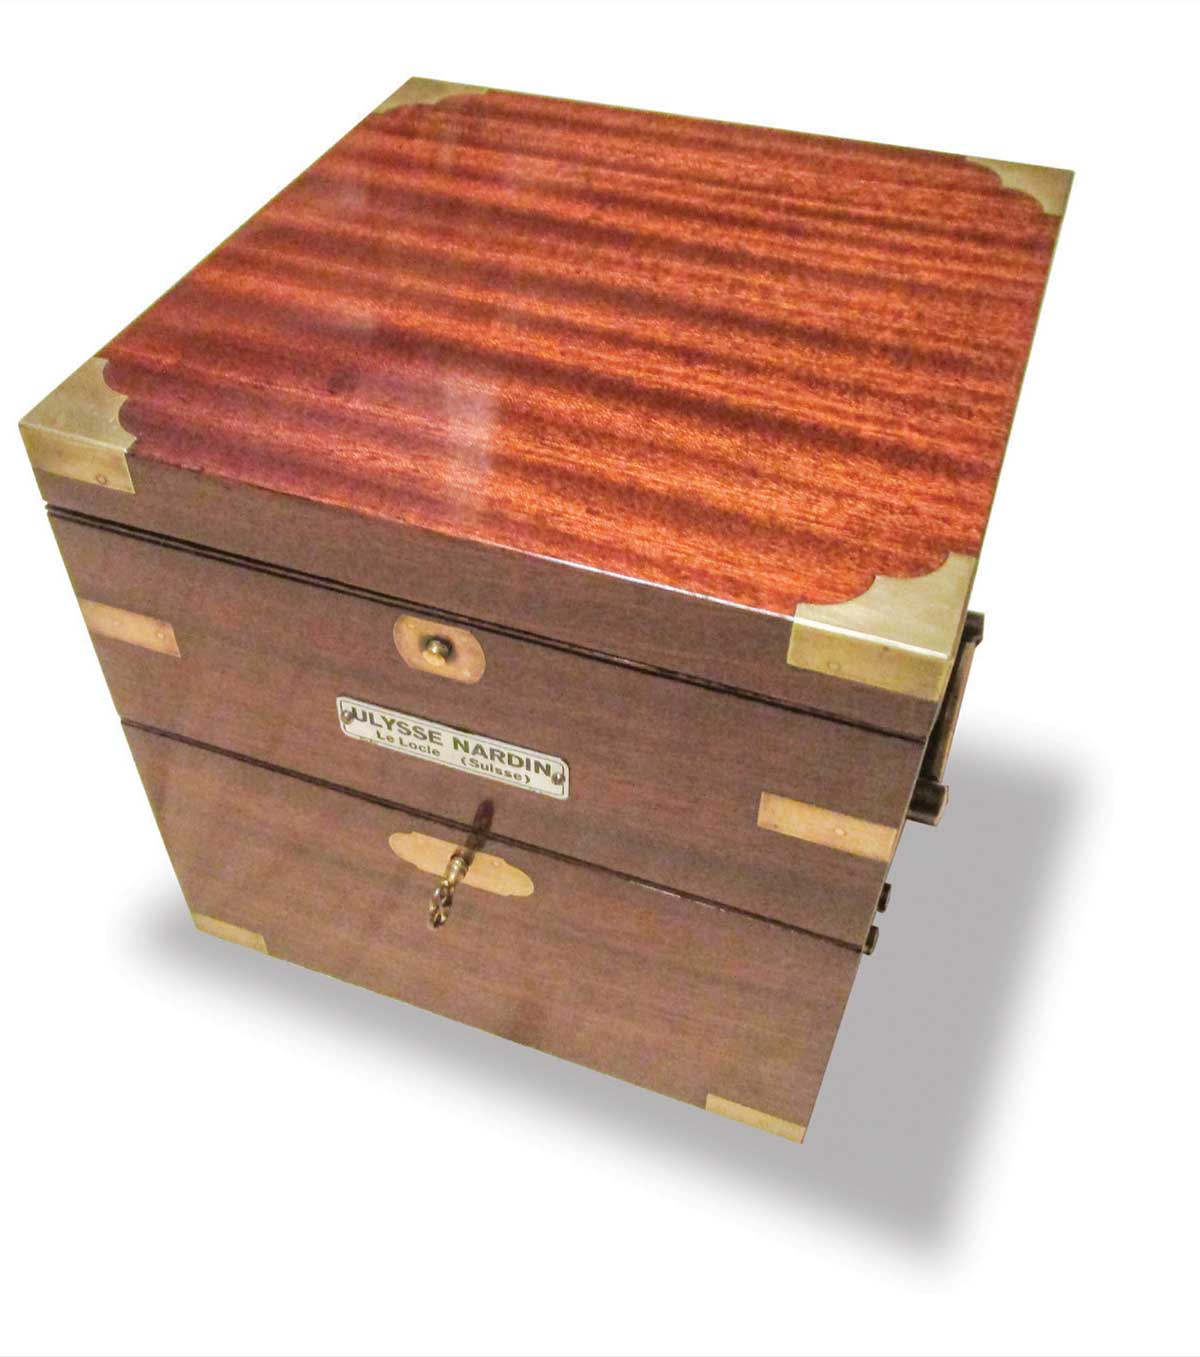 A 3-tier box made of ribbon-cut Honduran mahogany with brass-bound accents, nameplate, and drop handles